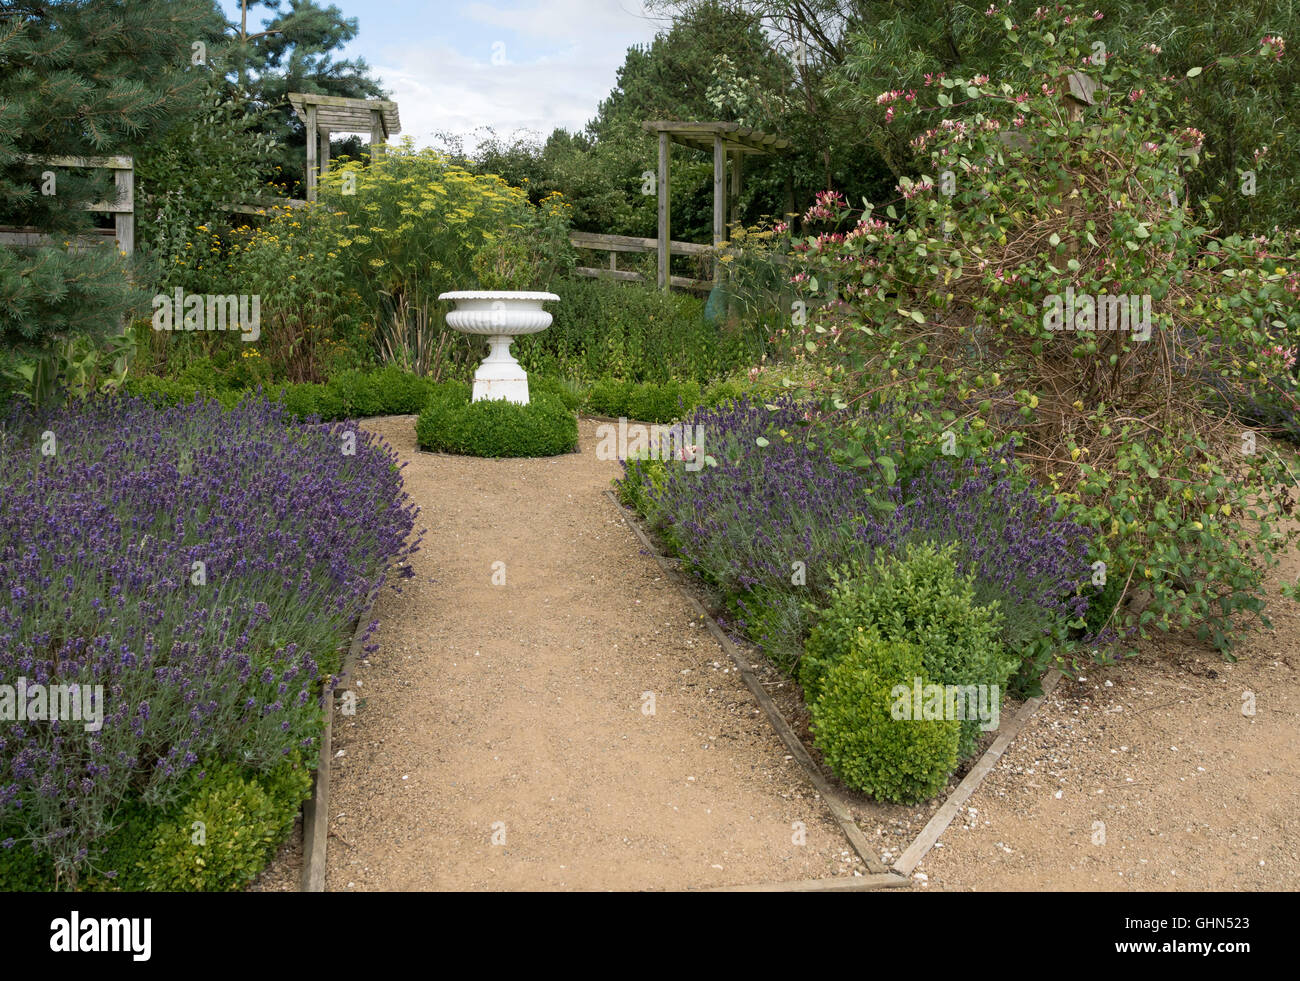 Wolds Way Lavender showing a corner of the extensive gardens situated at Winteringham, North Yorkshire. Stock Photo